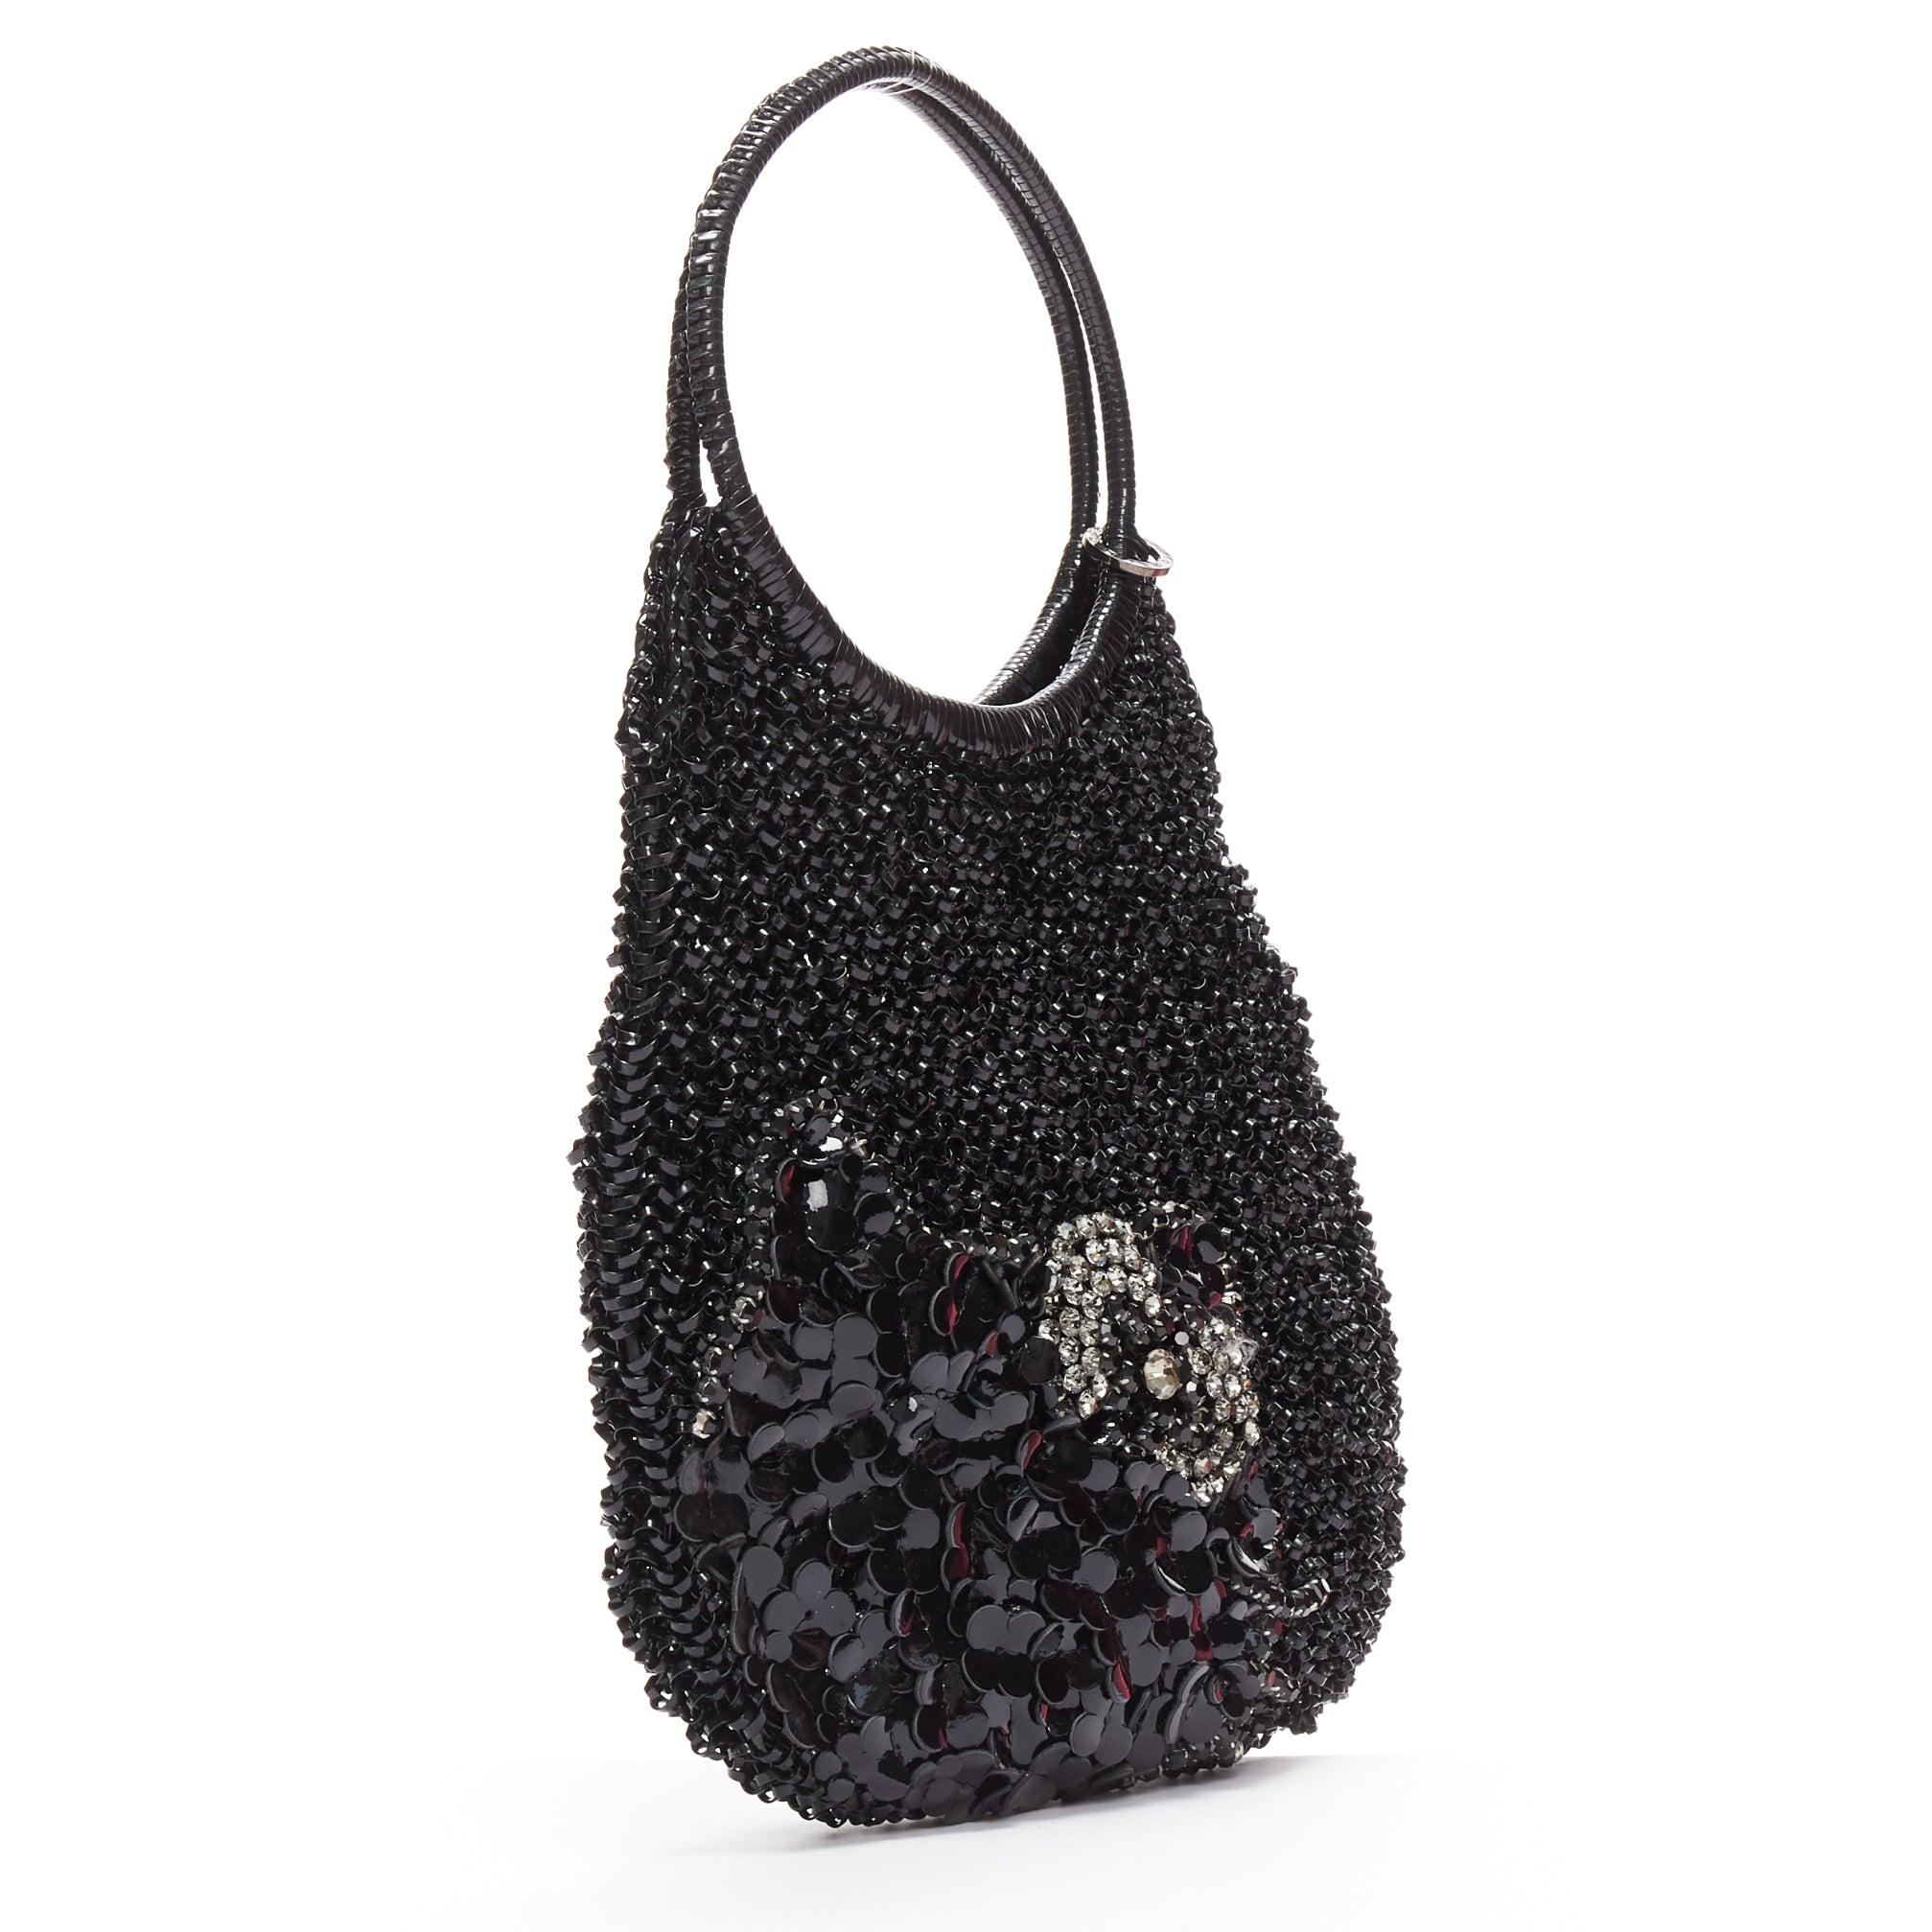 Black ANTEPRIMA HELLO KITTY Wire Bag black crystal leather sequin teardrop tote For Sale